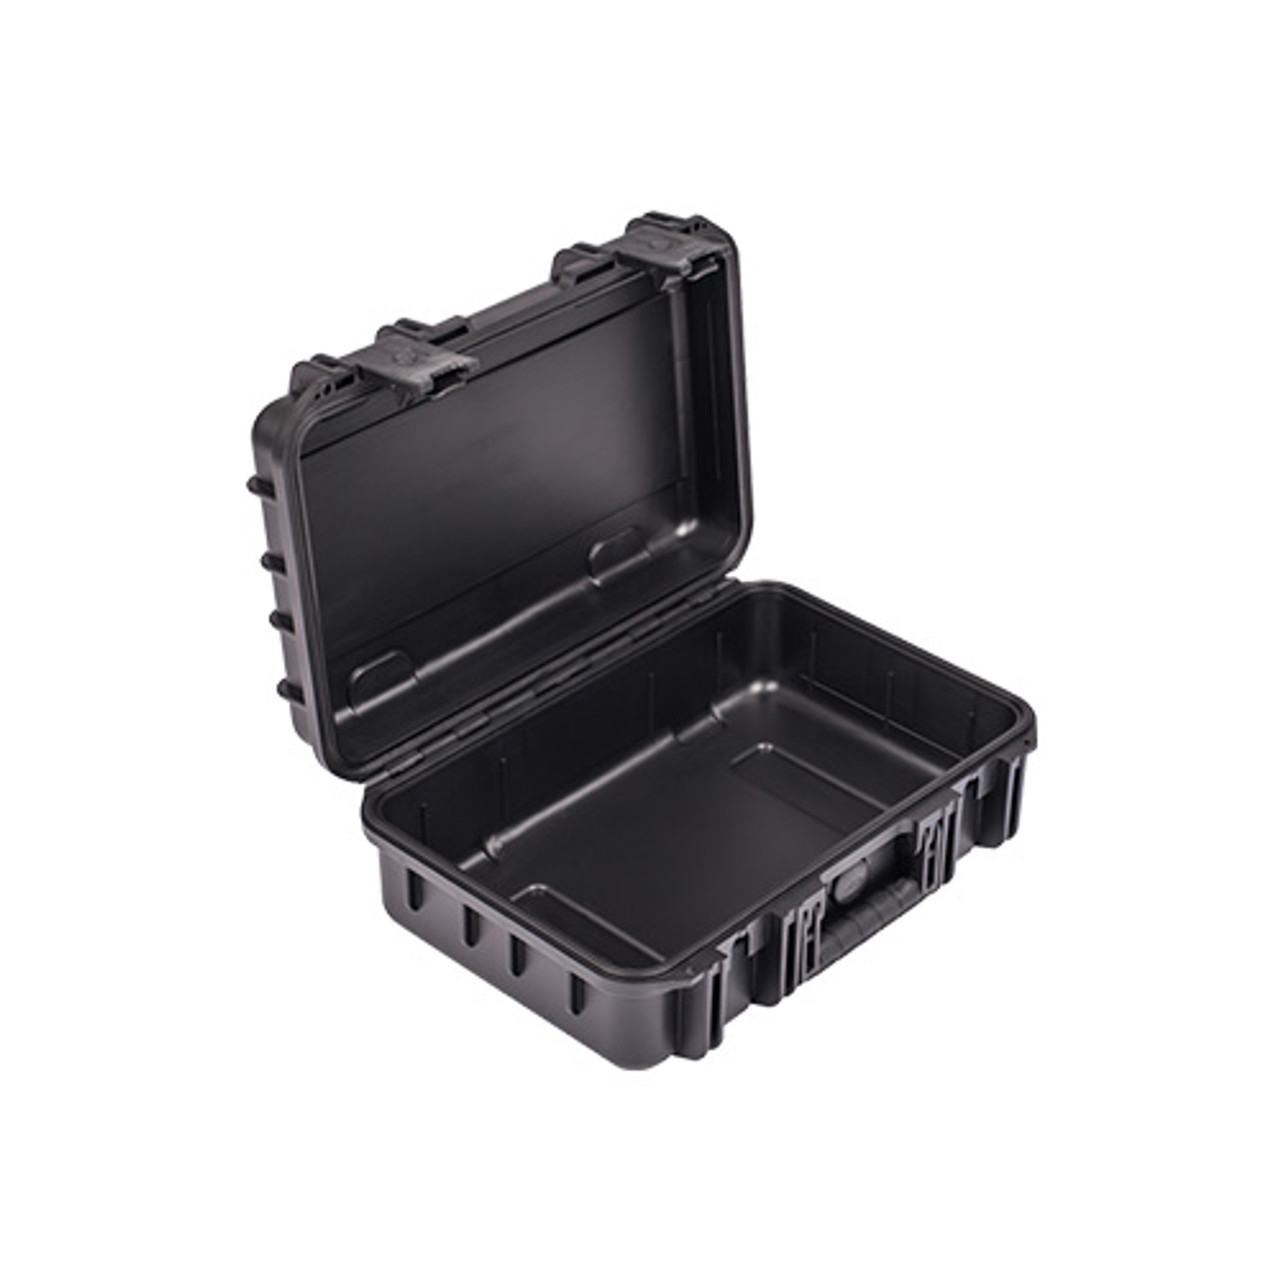 Peli Cases  Free Next Day Delivery